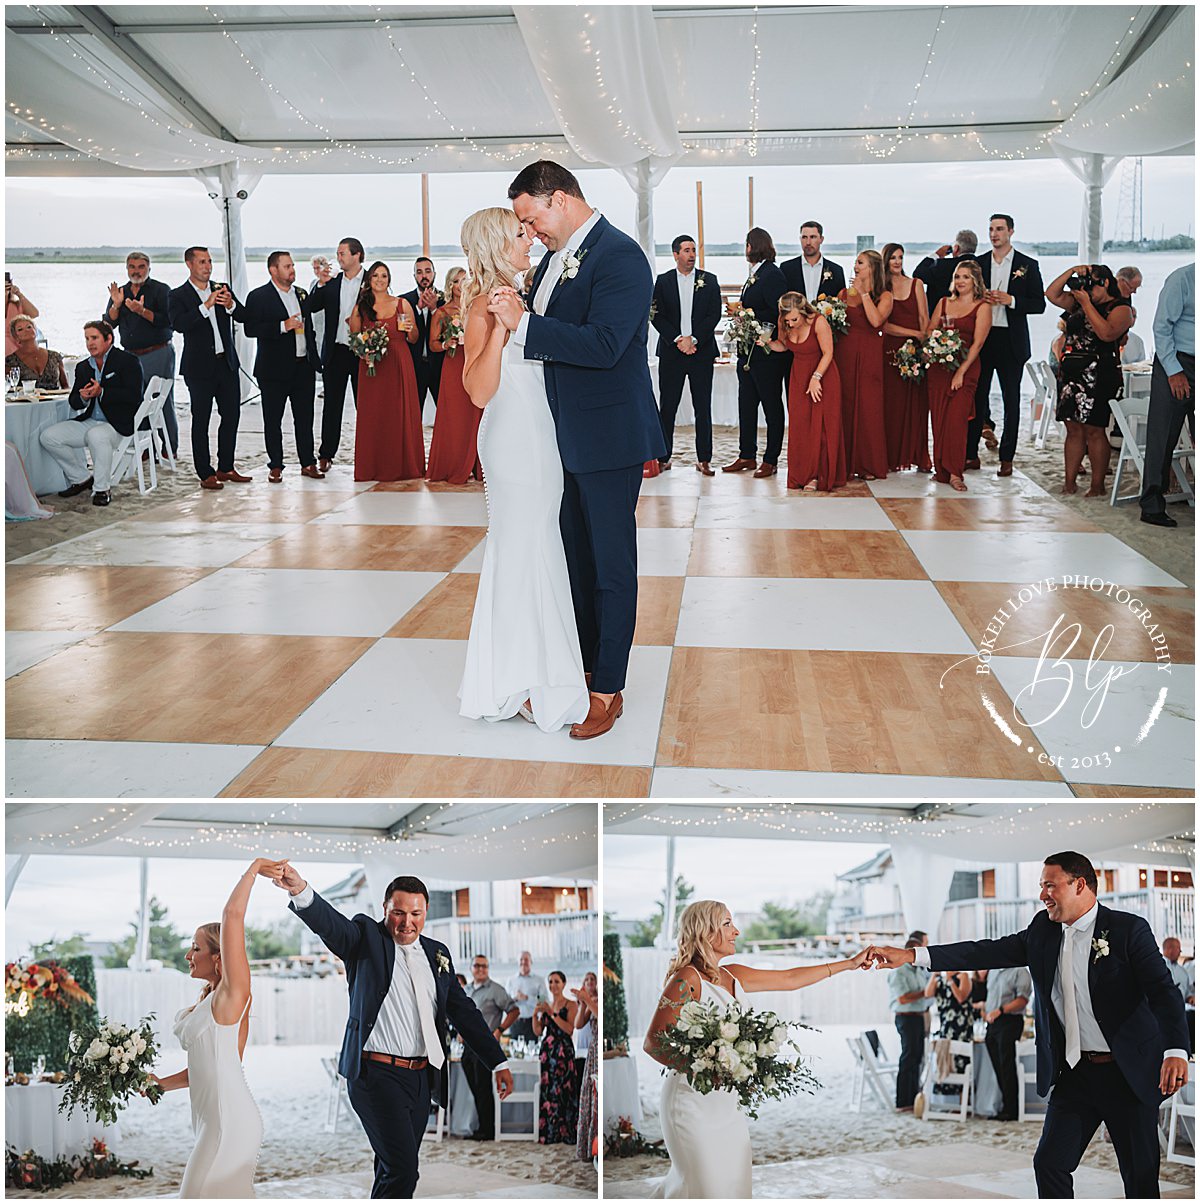 Bokeh Love Photography, Deauville Inn Wedding, Bride and Groom first dance at wedding